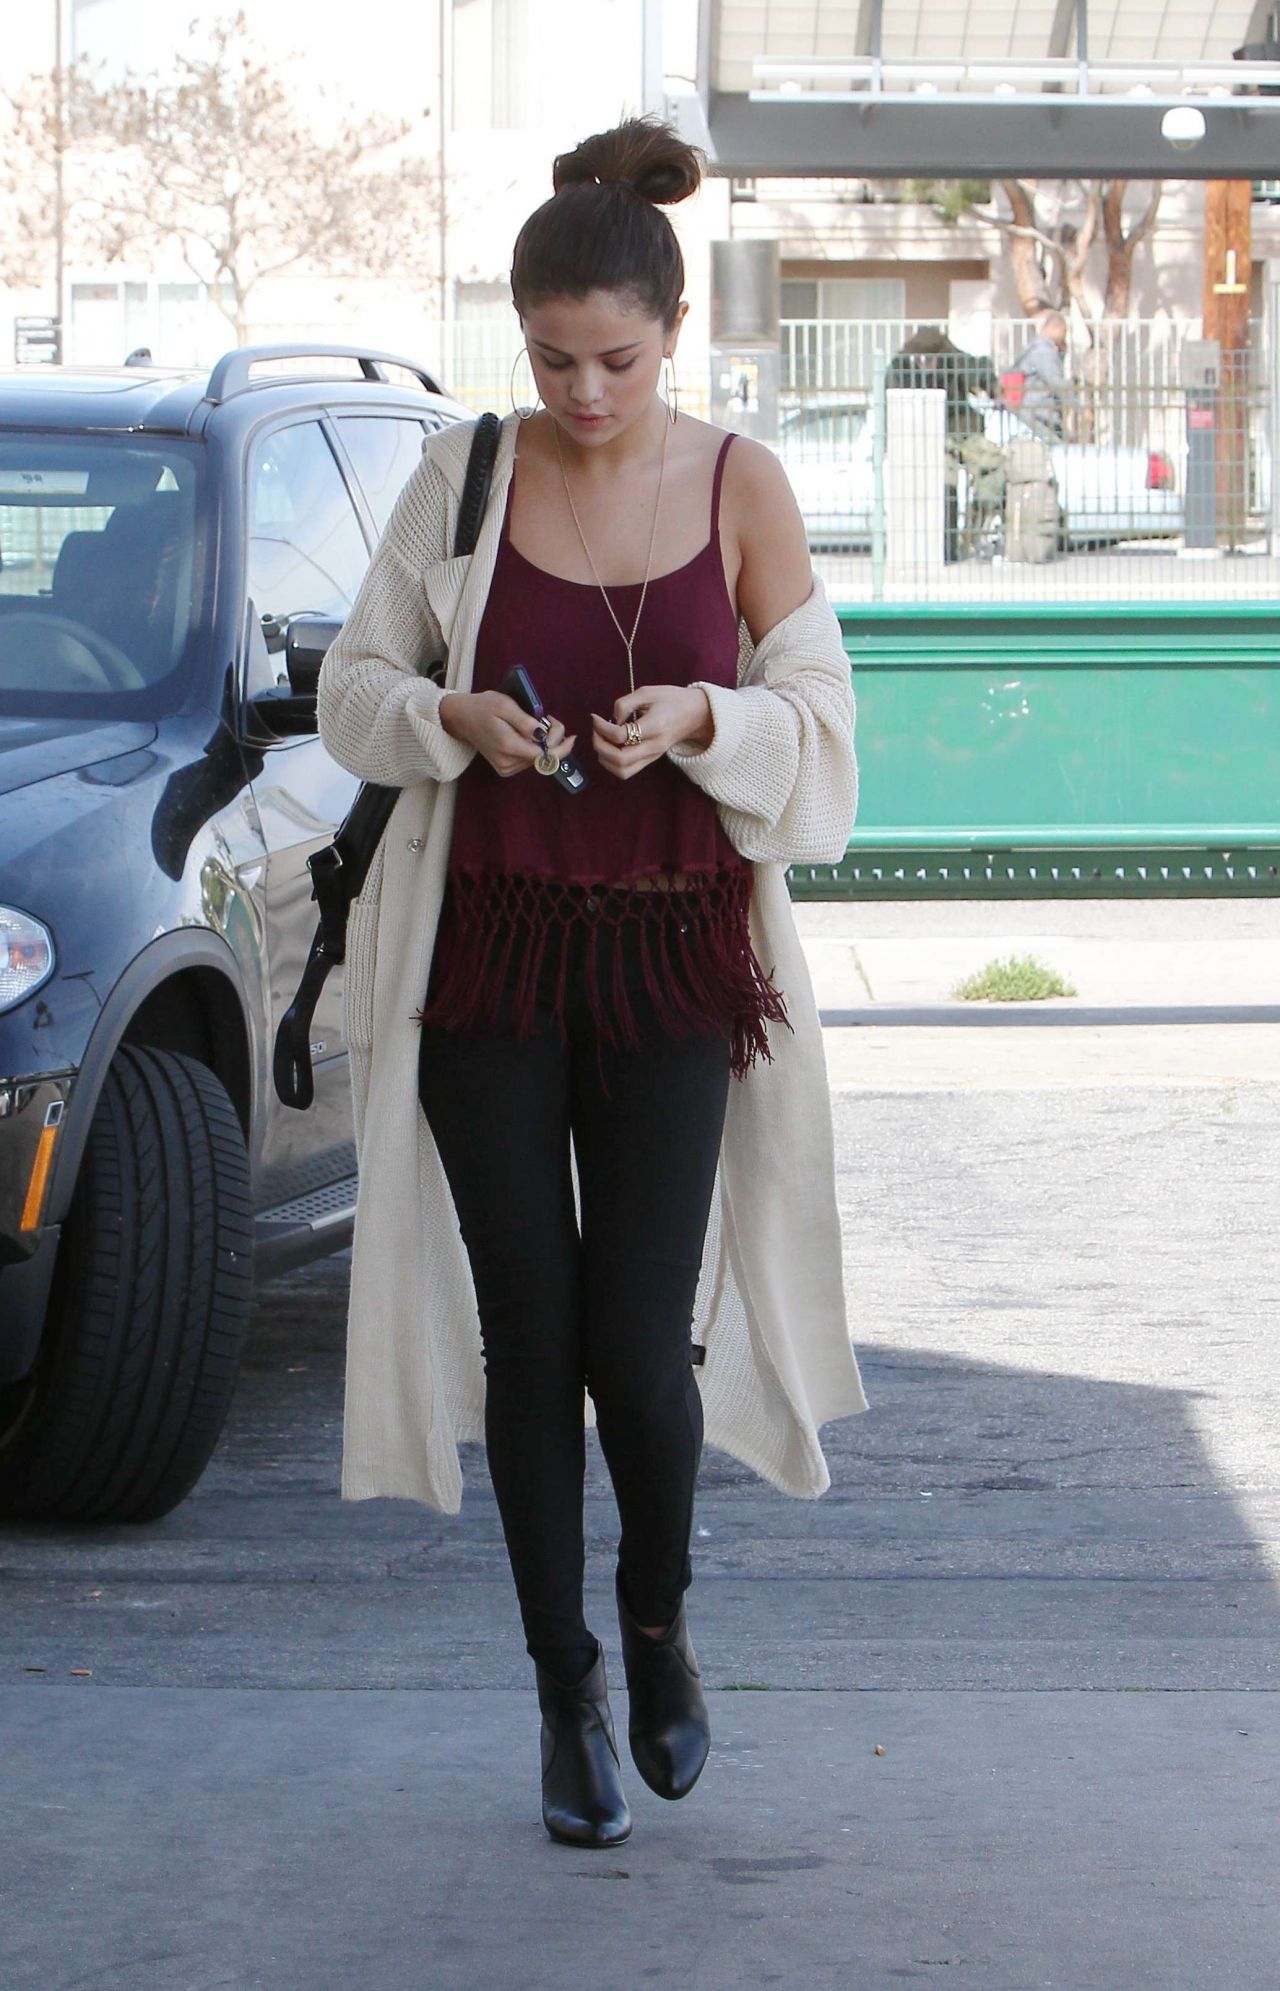 Selena Gomez in Tights - Out in Los Angeles - February 20141280 x 1991